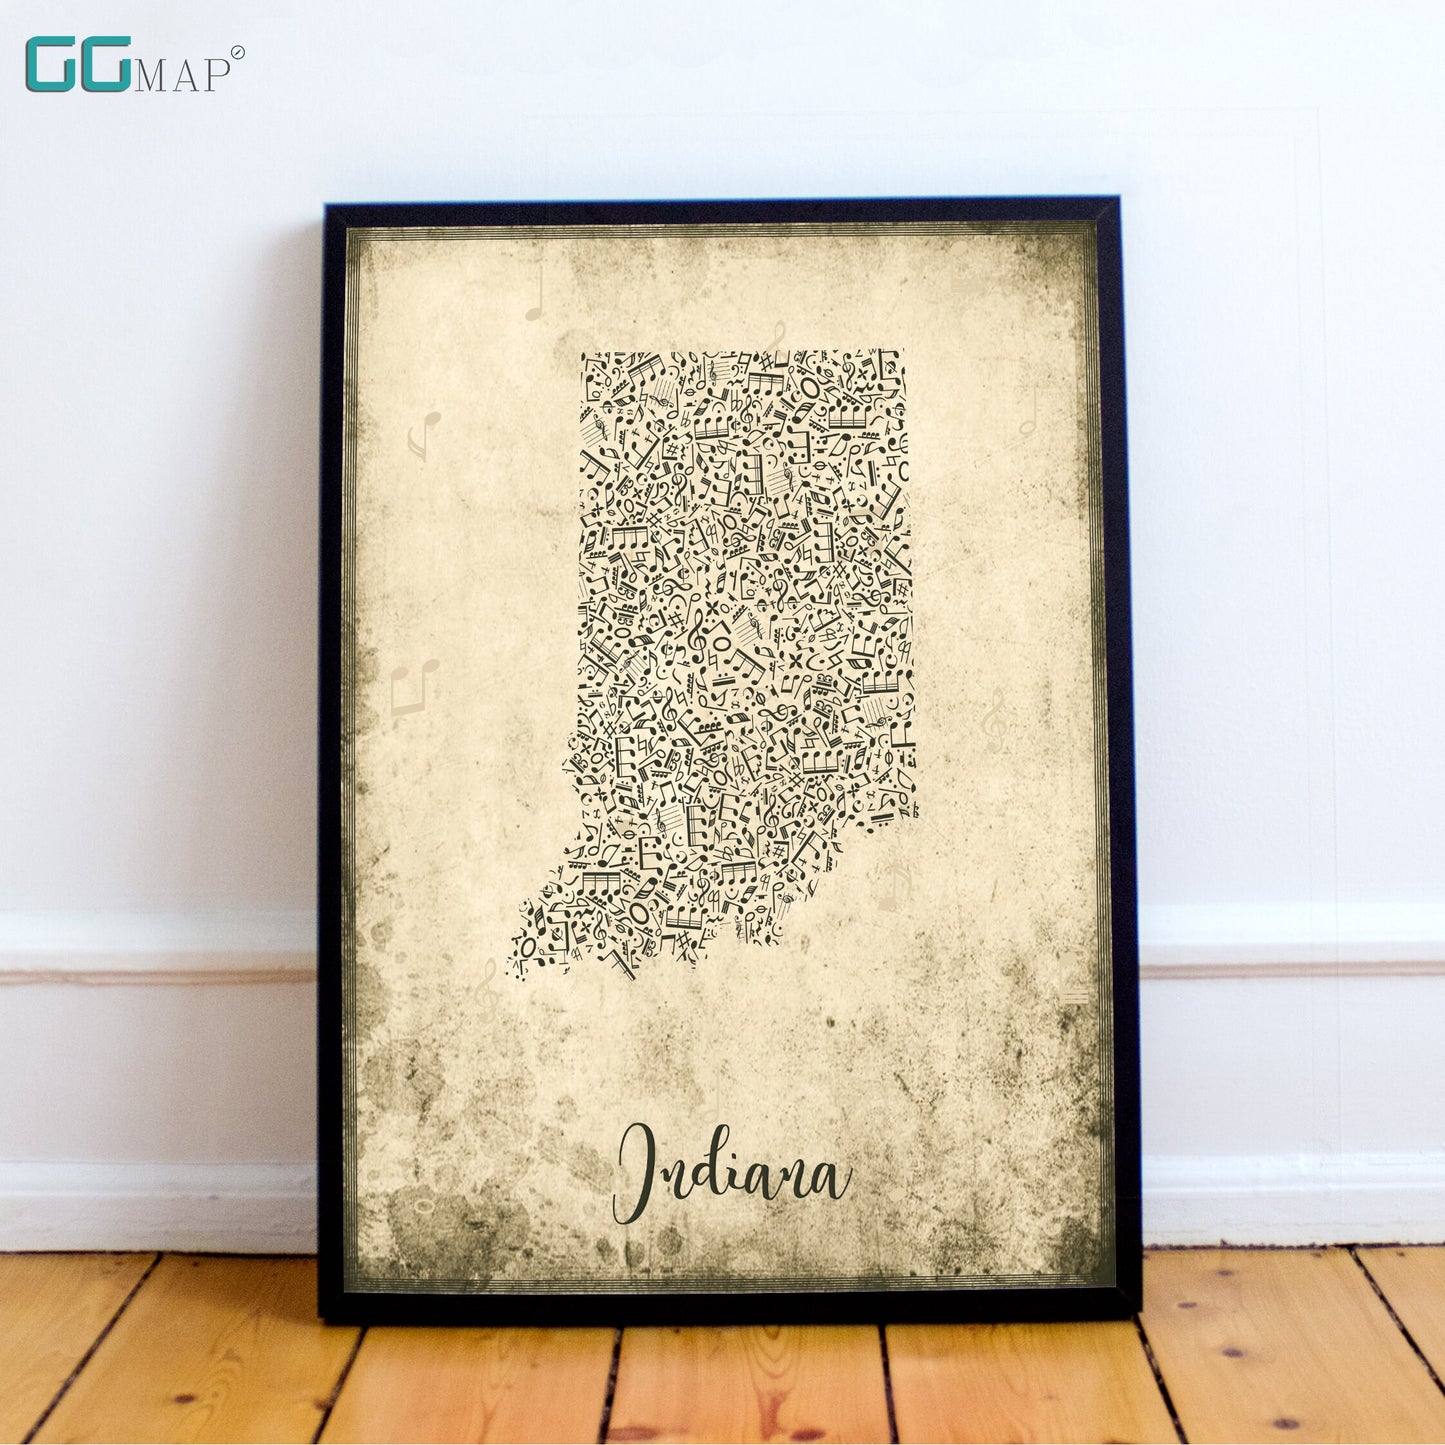 INDIANA map - Indiana Music map - Travel poster - Wall decor - Office map - Indiana gift - GGmap - Indiana poster